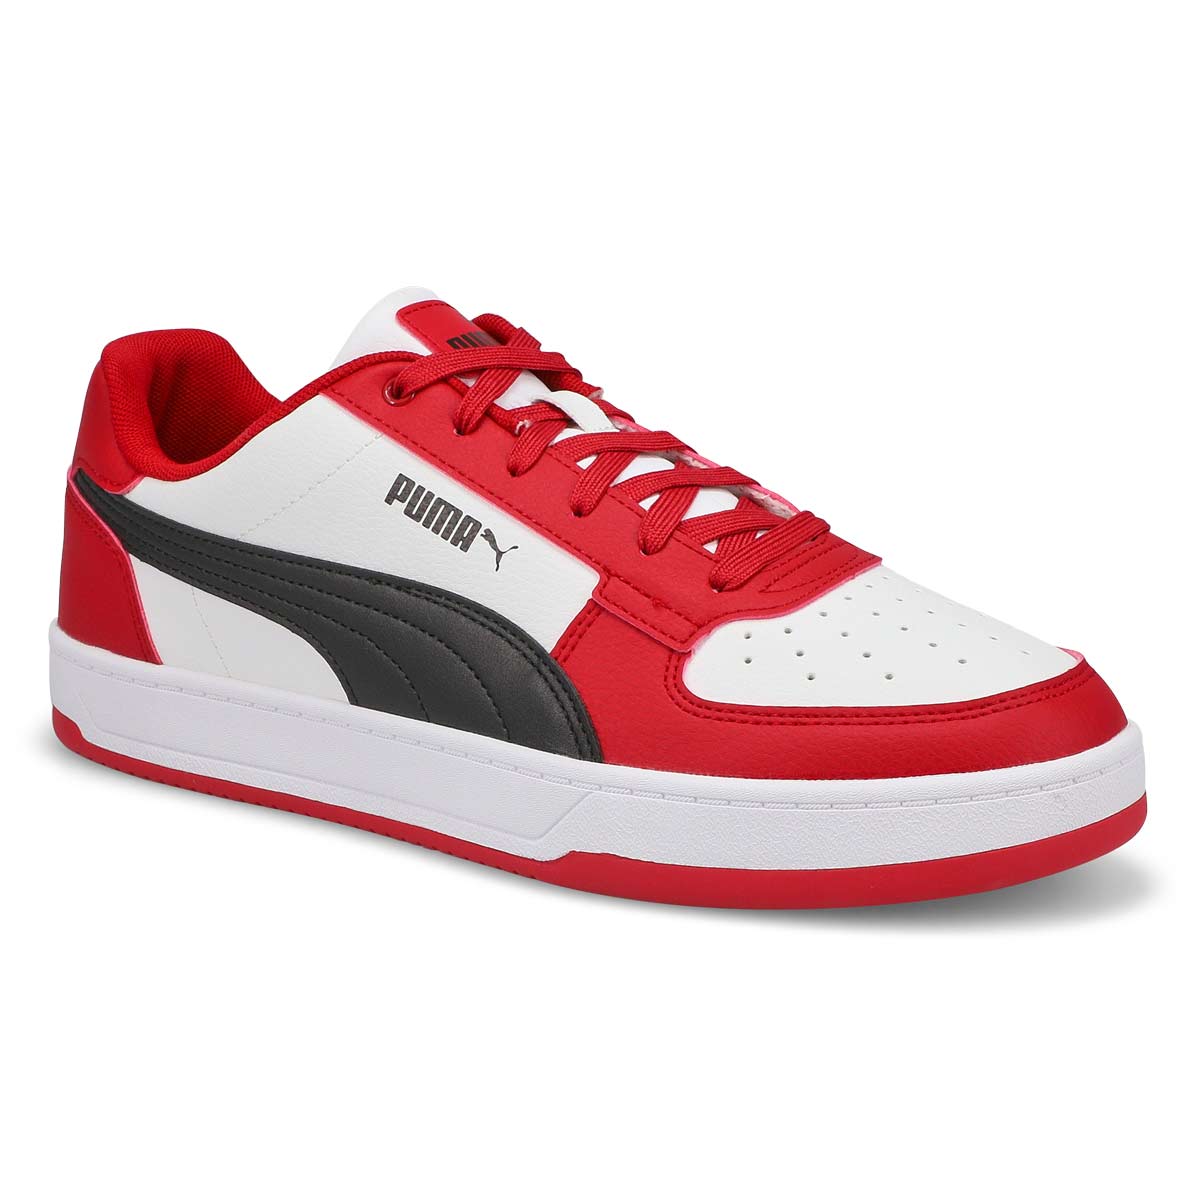 Men's Caven 2.0 Lace Up Sneaker - Red/White/Black